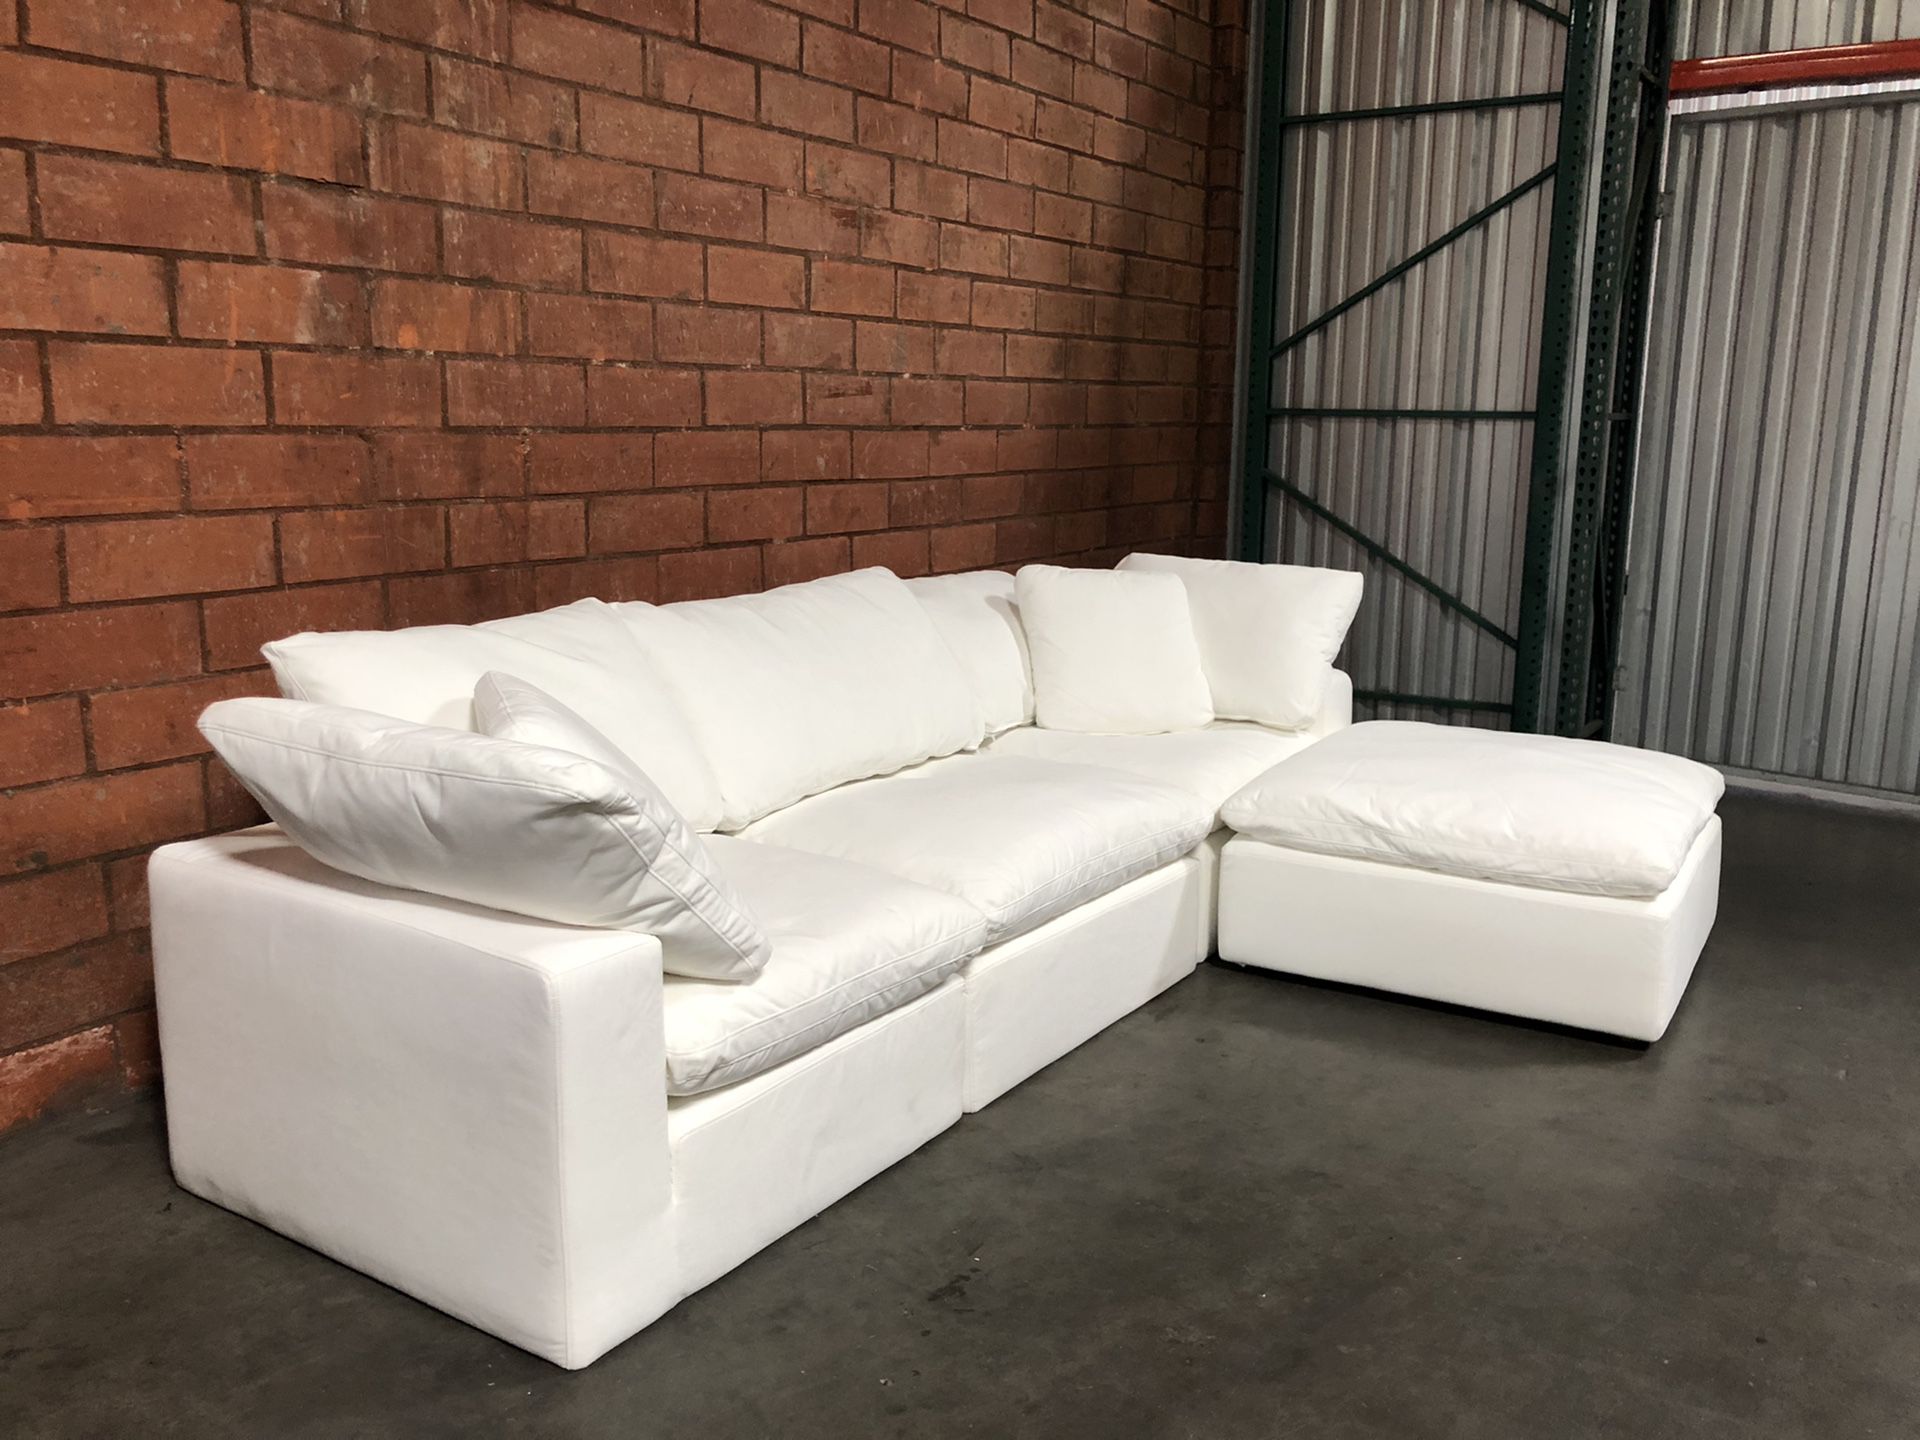 4 Piece White Cloud ► 100% STAIN RESISTANT ► Modular Sectional Sofa Couch ► $4,700 REG $10,000 PRICE FINAL - Restoration Hardware